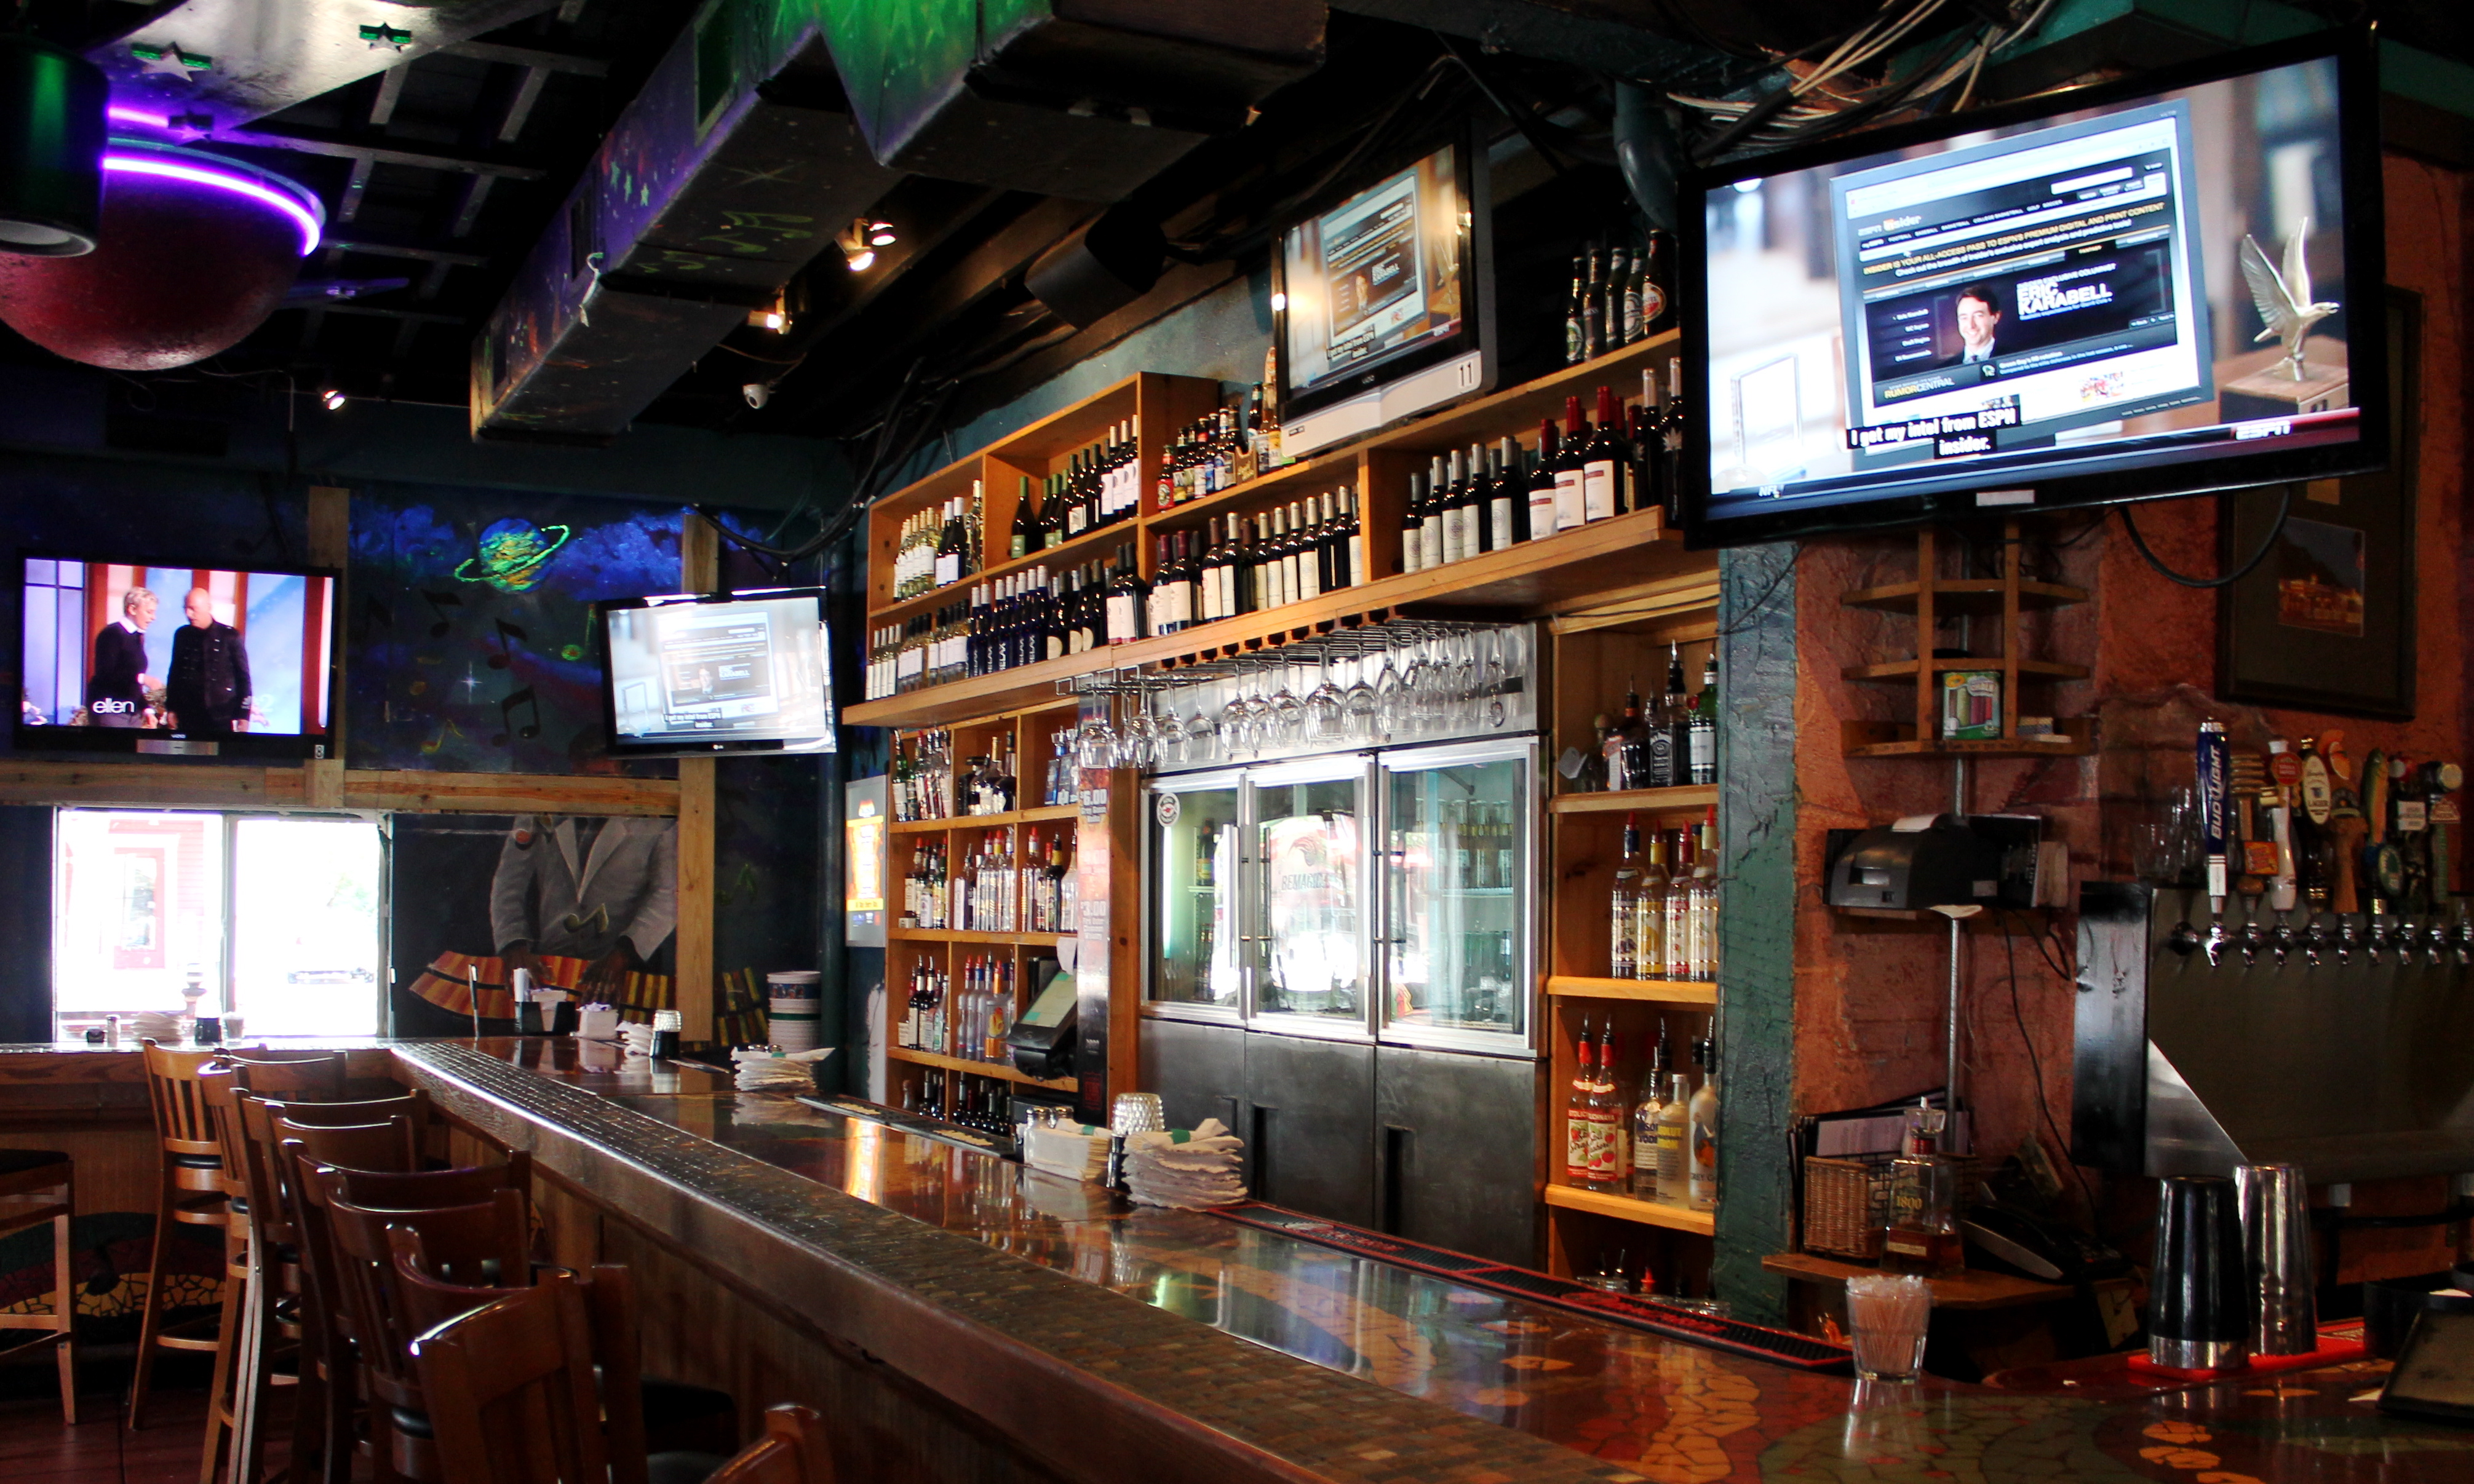 WildSide BBQ Bar & Grille has a large selection of wine and beer, in ad...